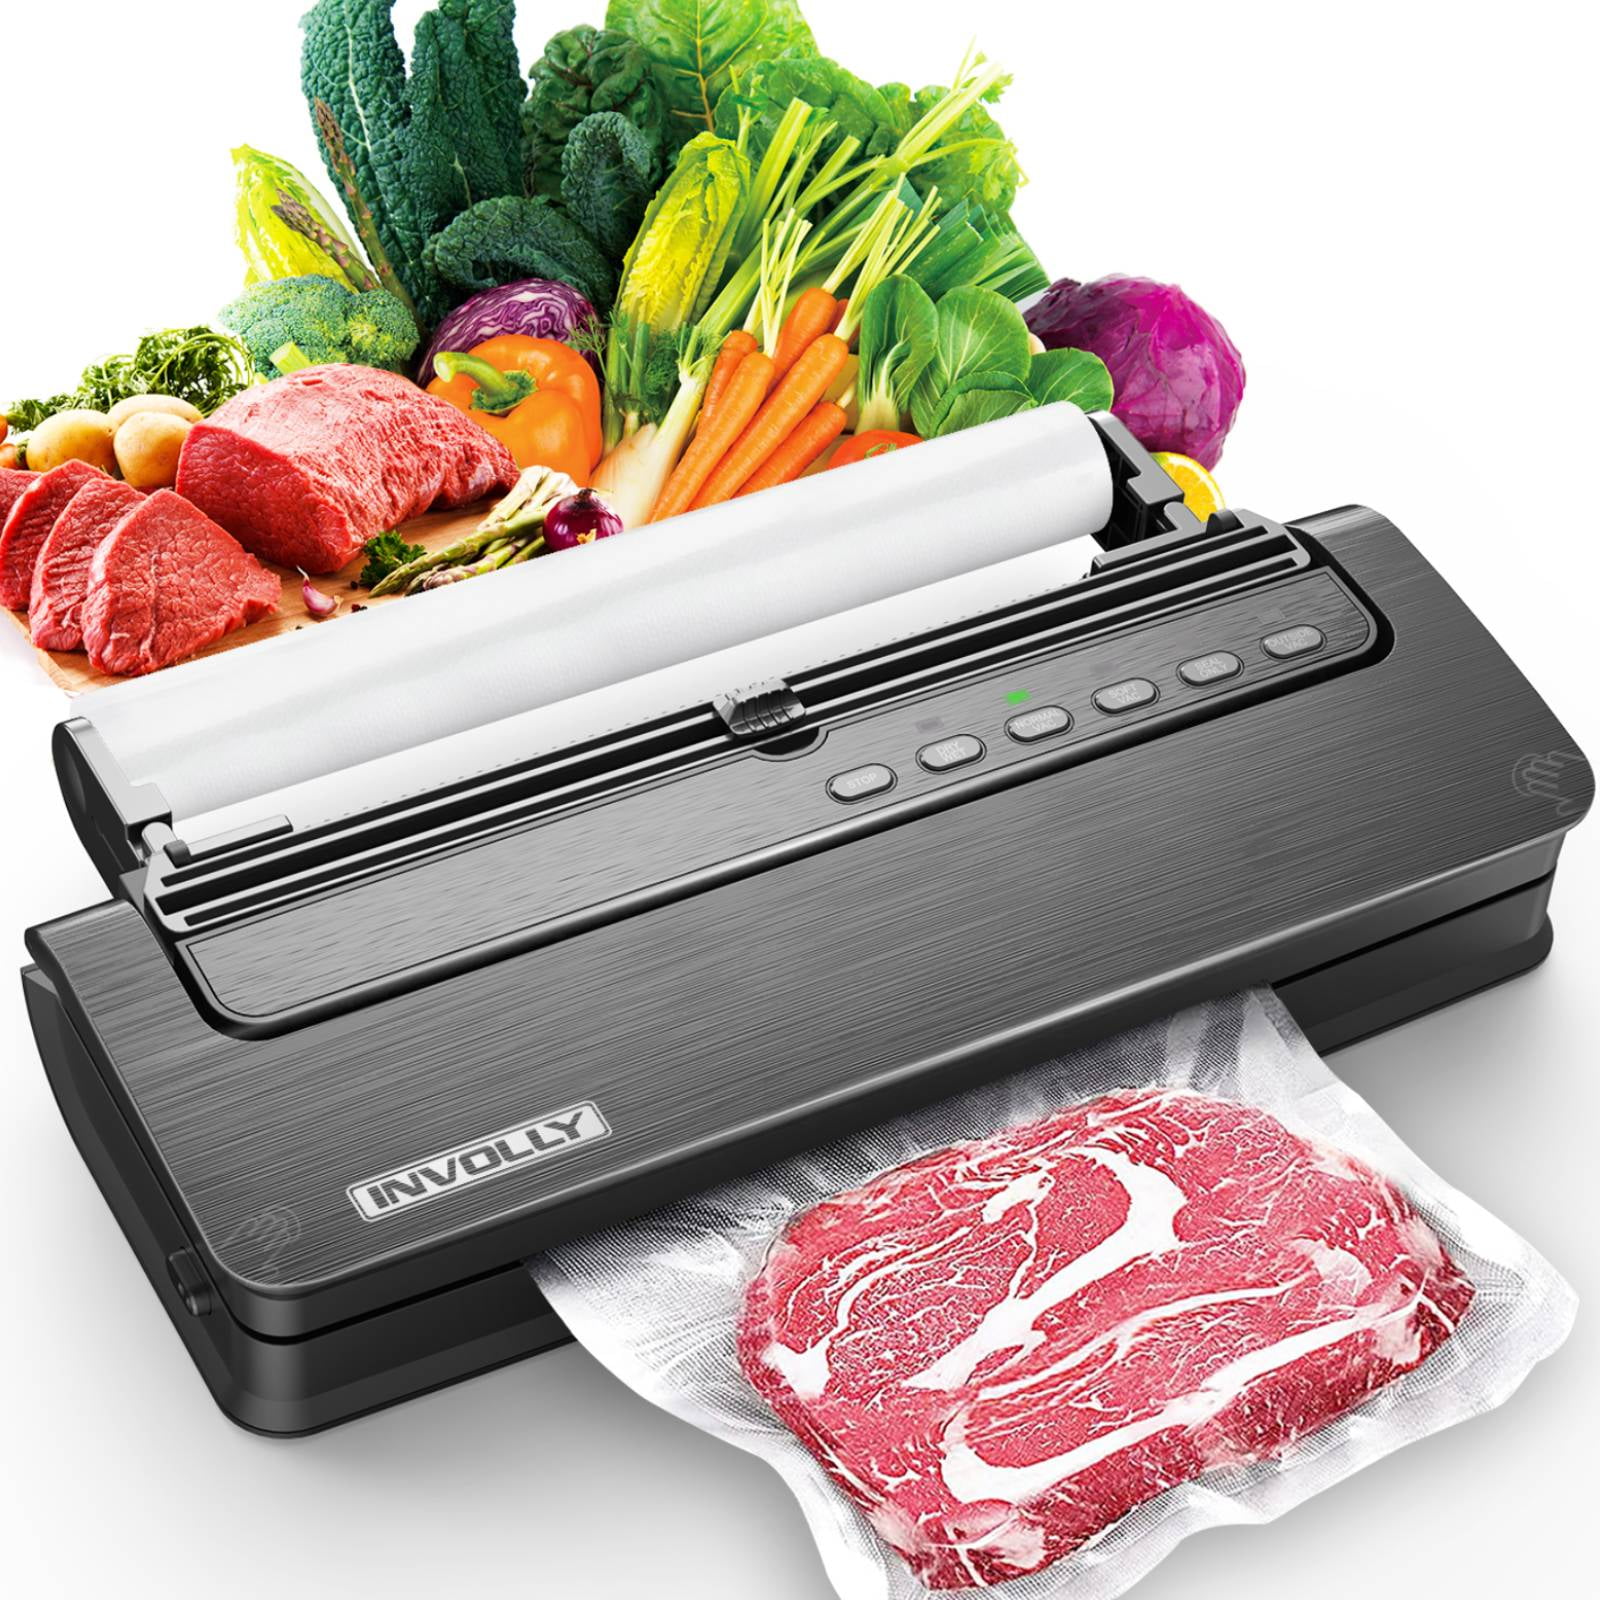 Automatic Food Vacuum Sealer Machine | Beelicious Pro 80Kpa 8-in-1 Food Vacuum Saver with Starter Kits | 15 Bags, Pulse Function, Moist&Dry Mode and